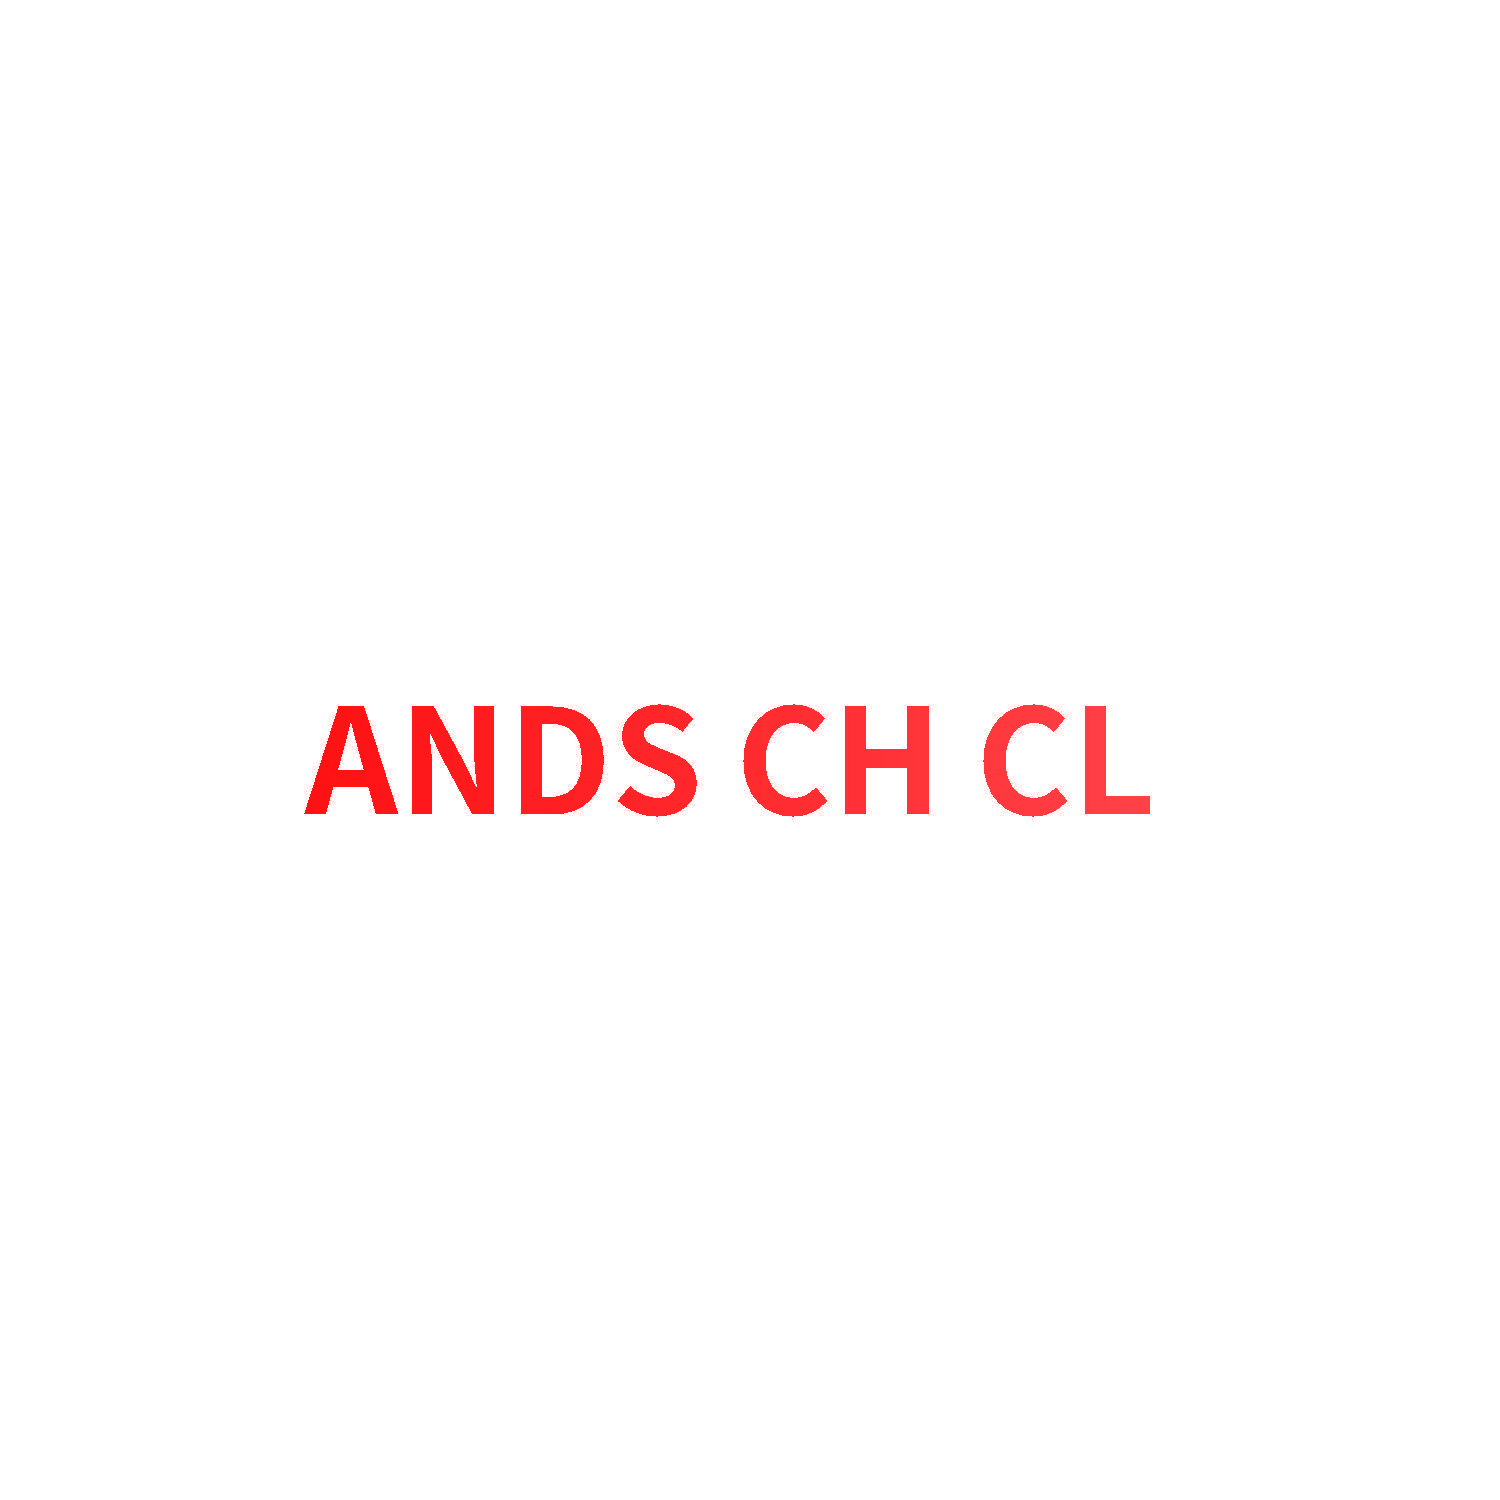 ANDS CH CL